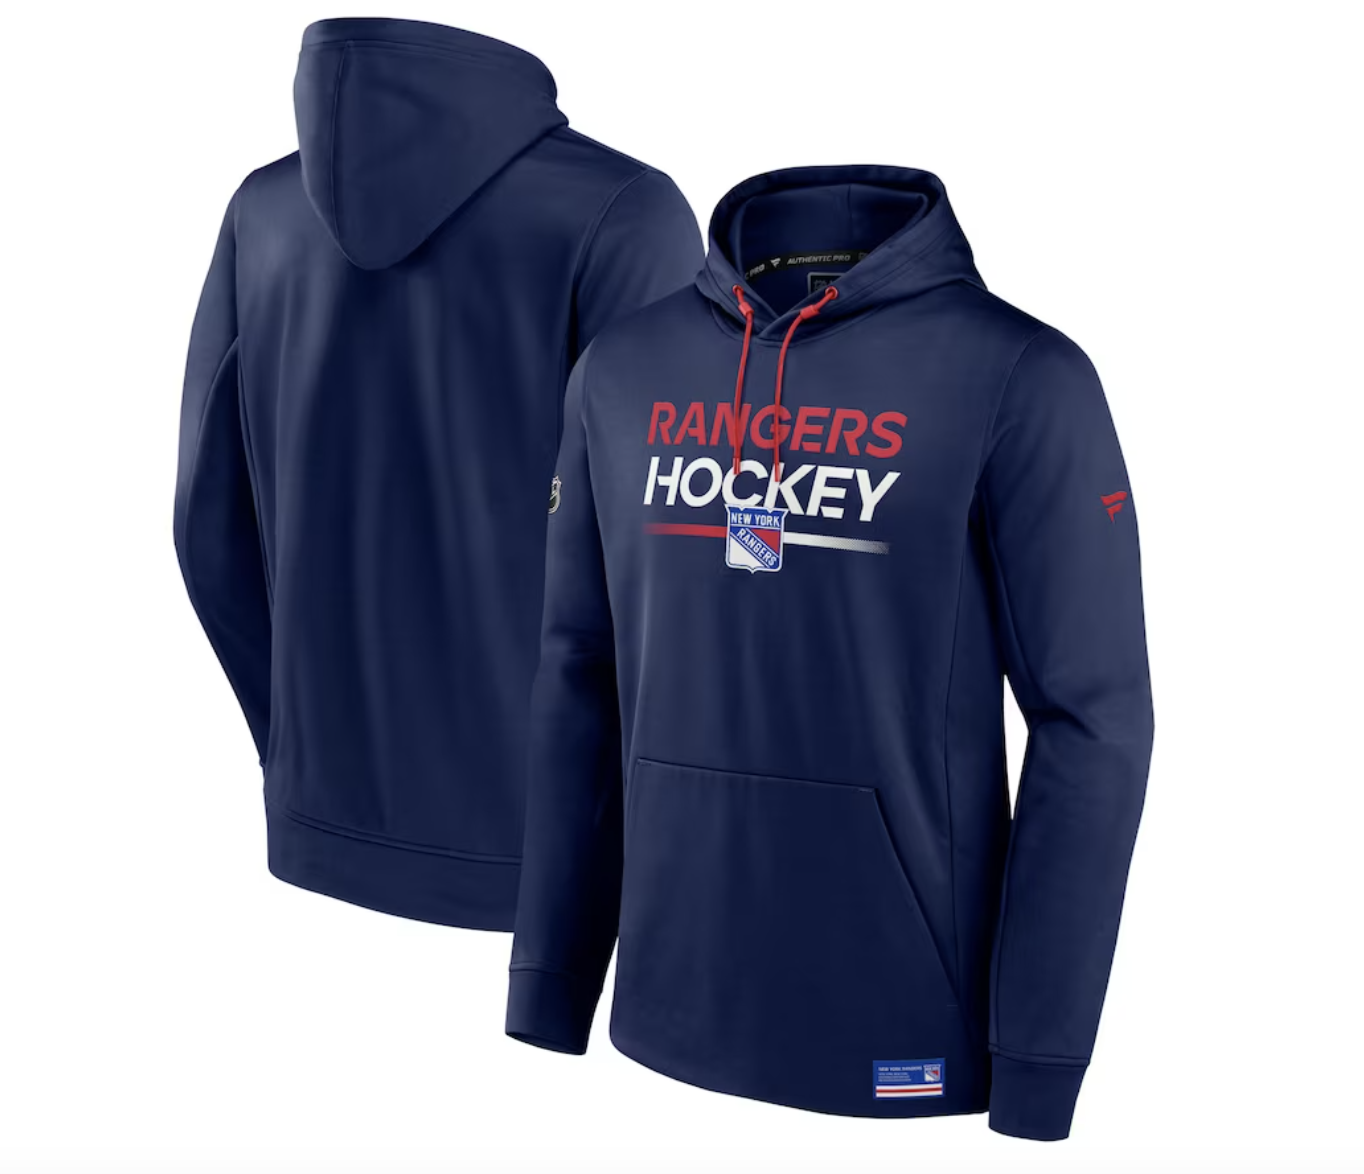 NHL Authentic Pro gear: Where to buy 2023 performance hoodies